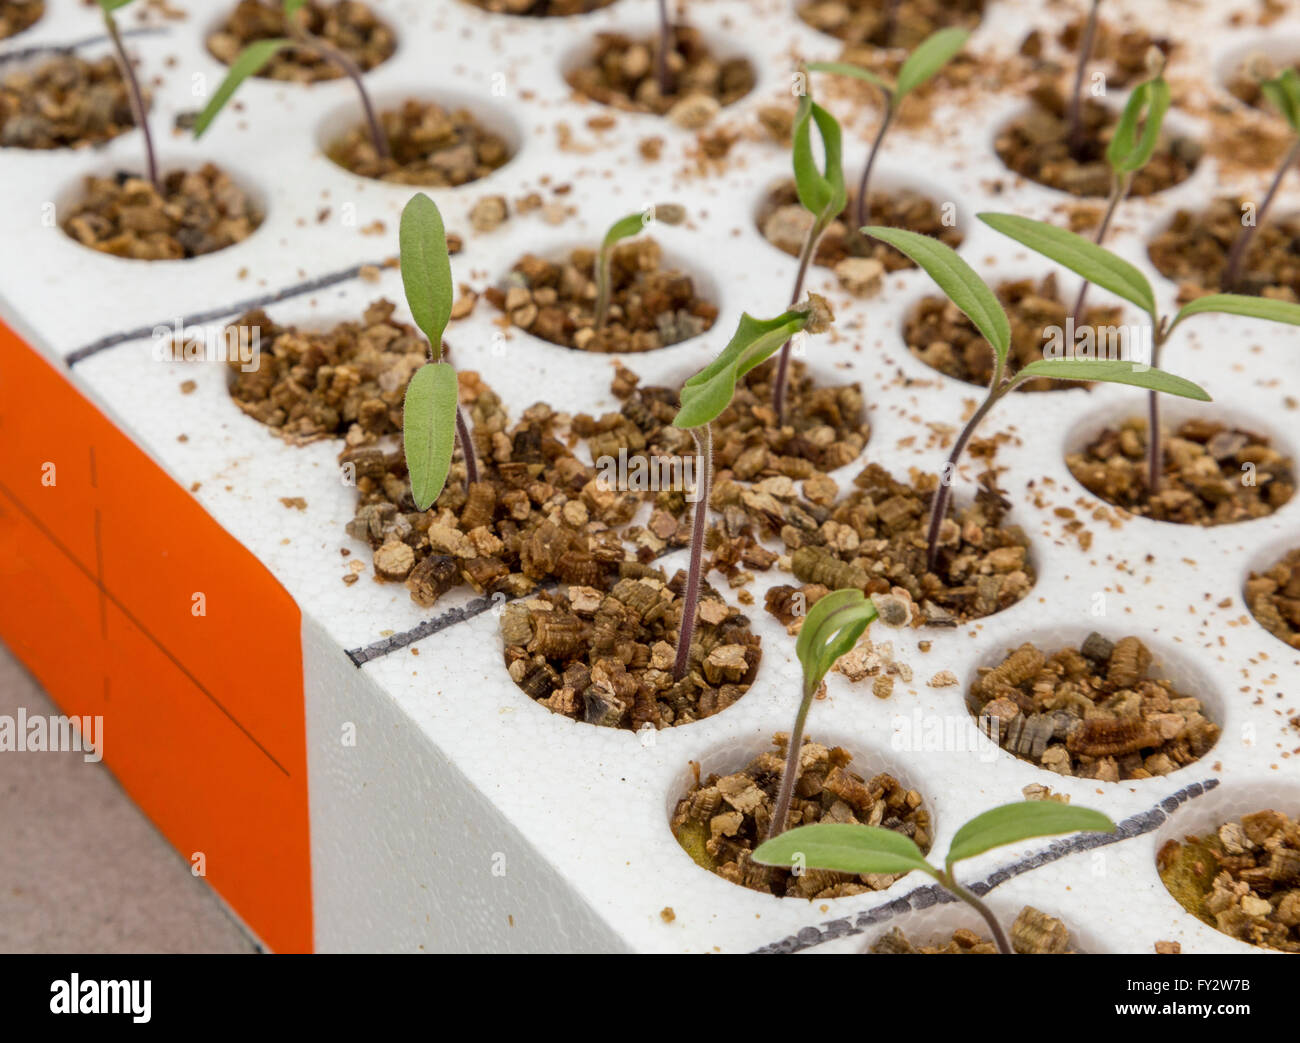 Tomato plant at early stage in an tray Stock Photo